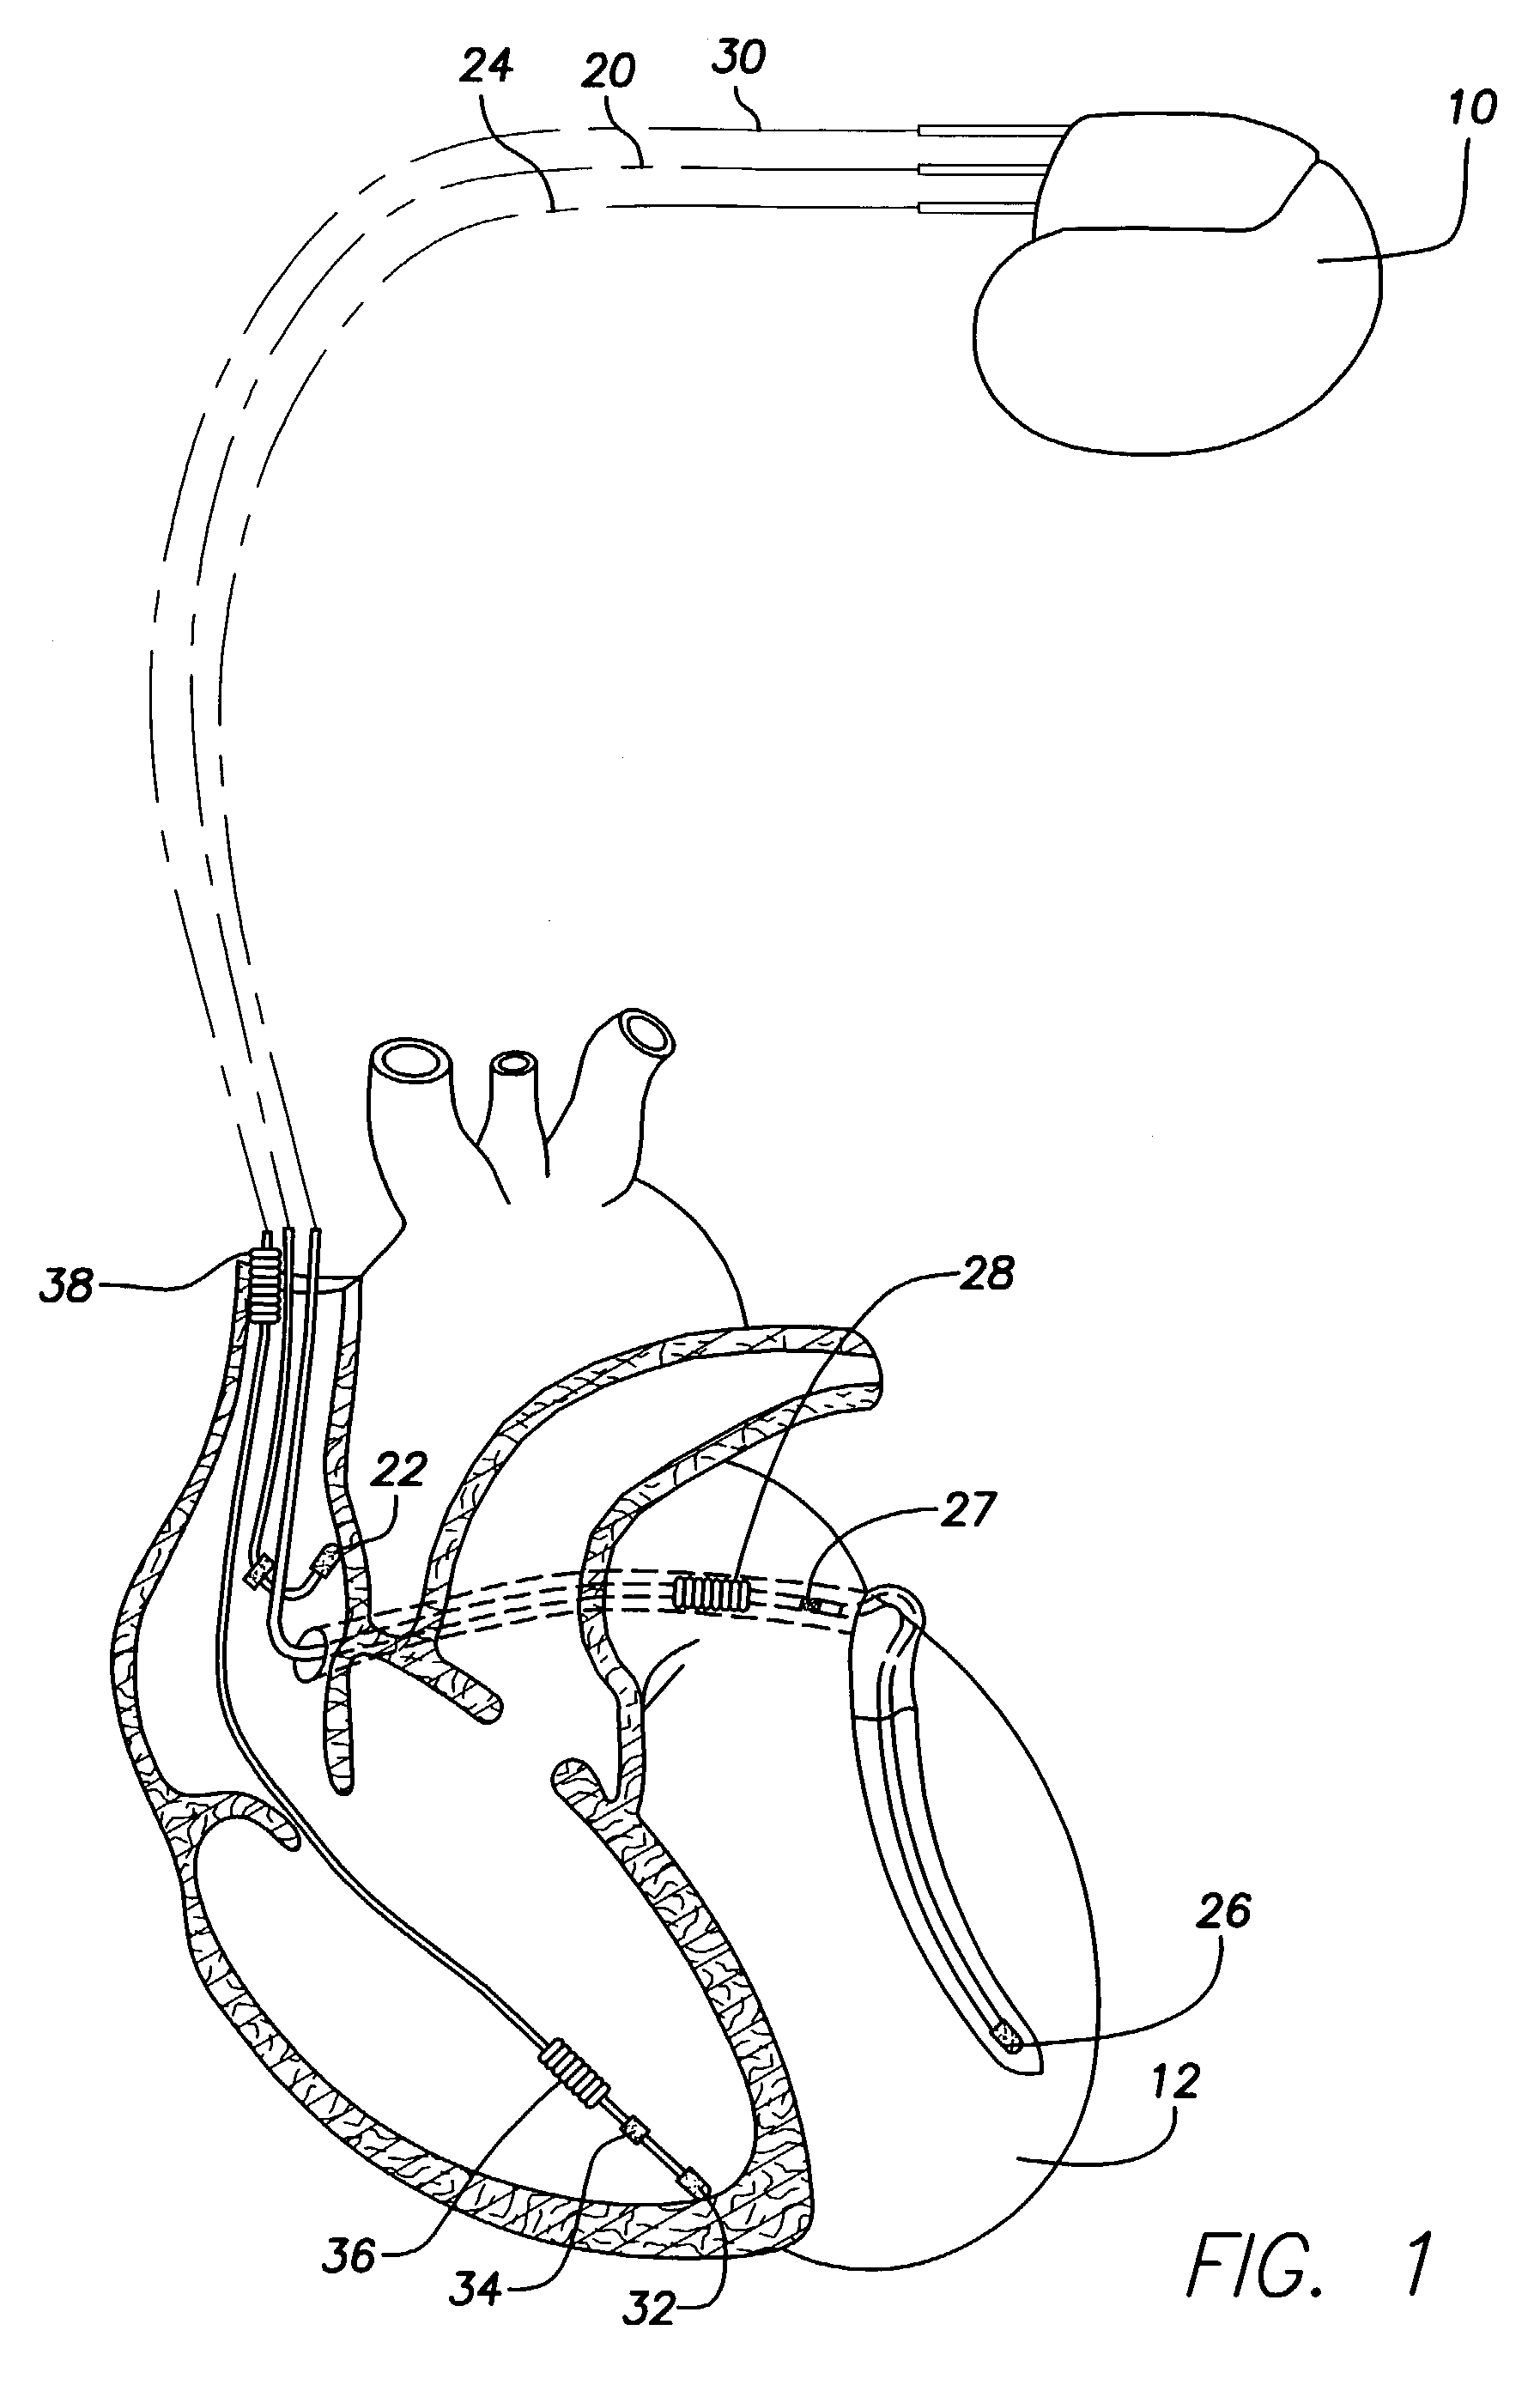 System and method for detecting circadian states using an implantable medical device